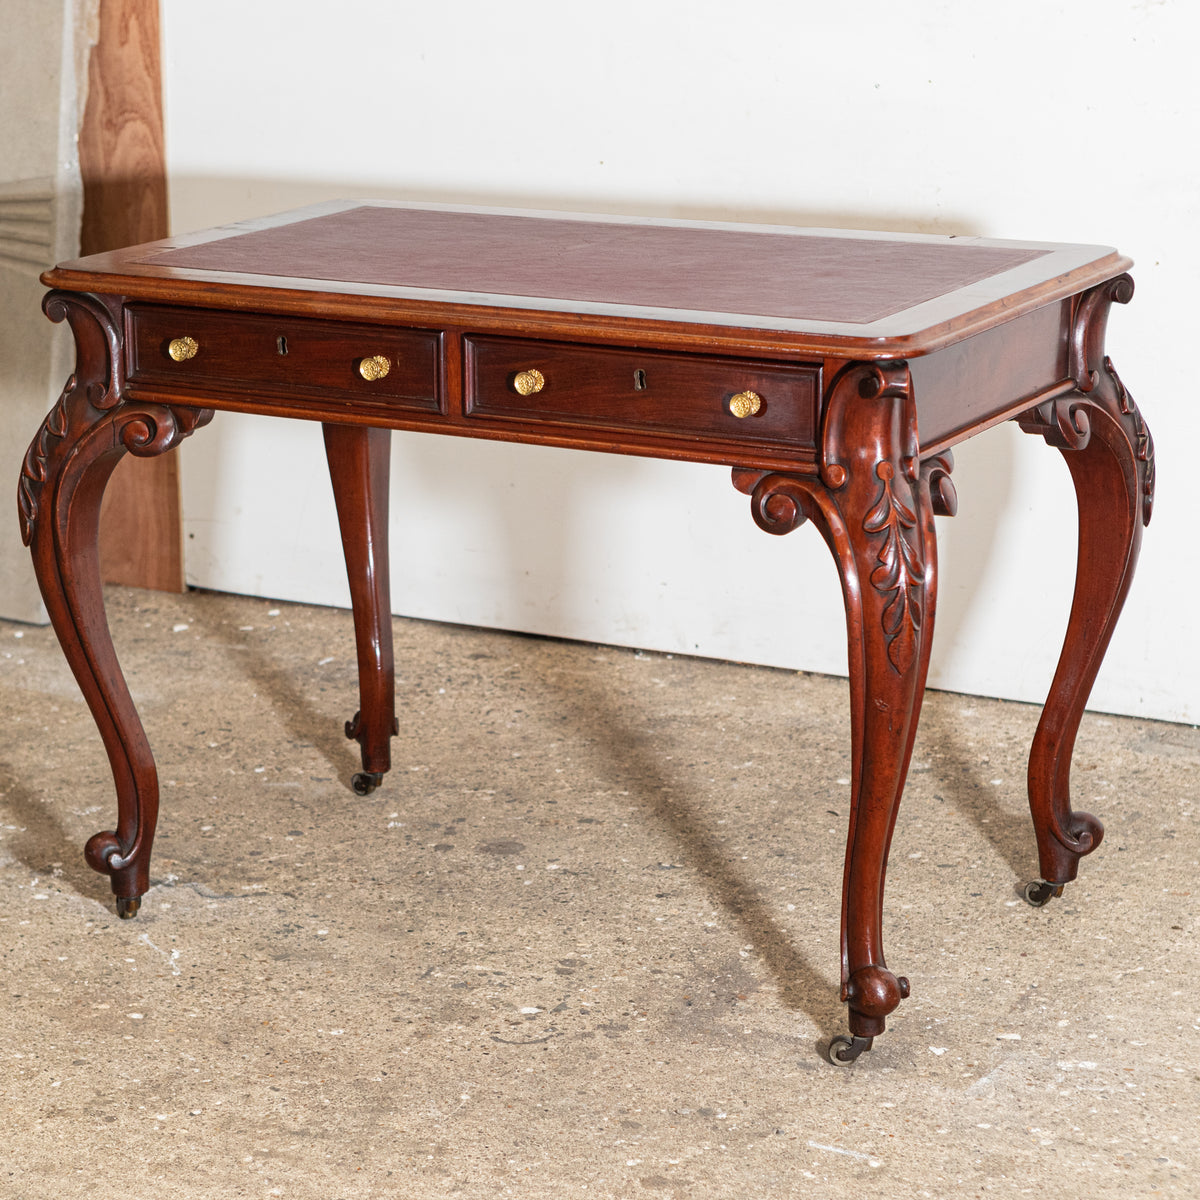 Antique Victorian Mahogany Writing Desk | The Architectural Forum